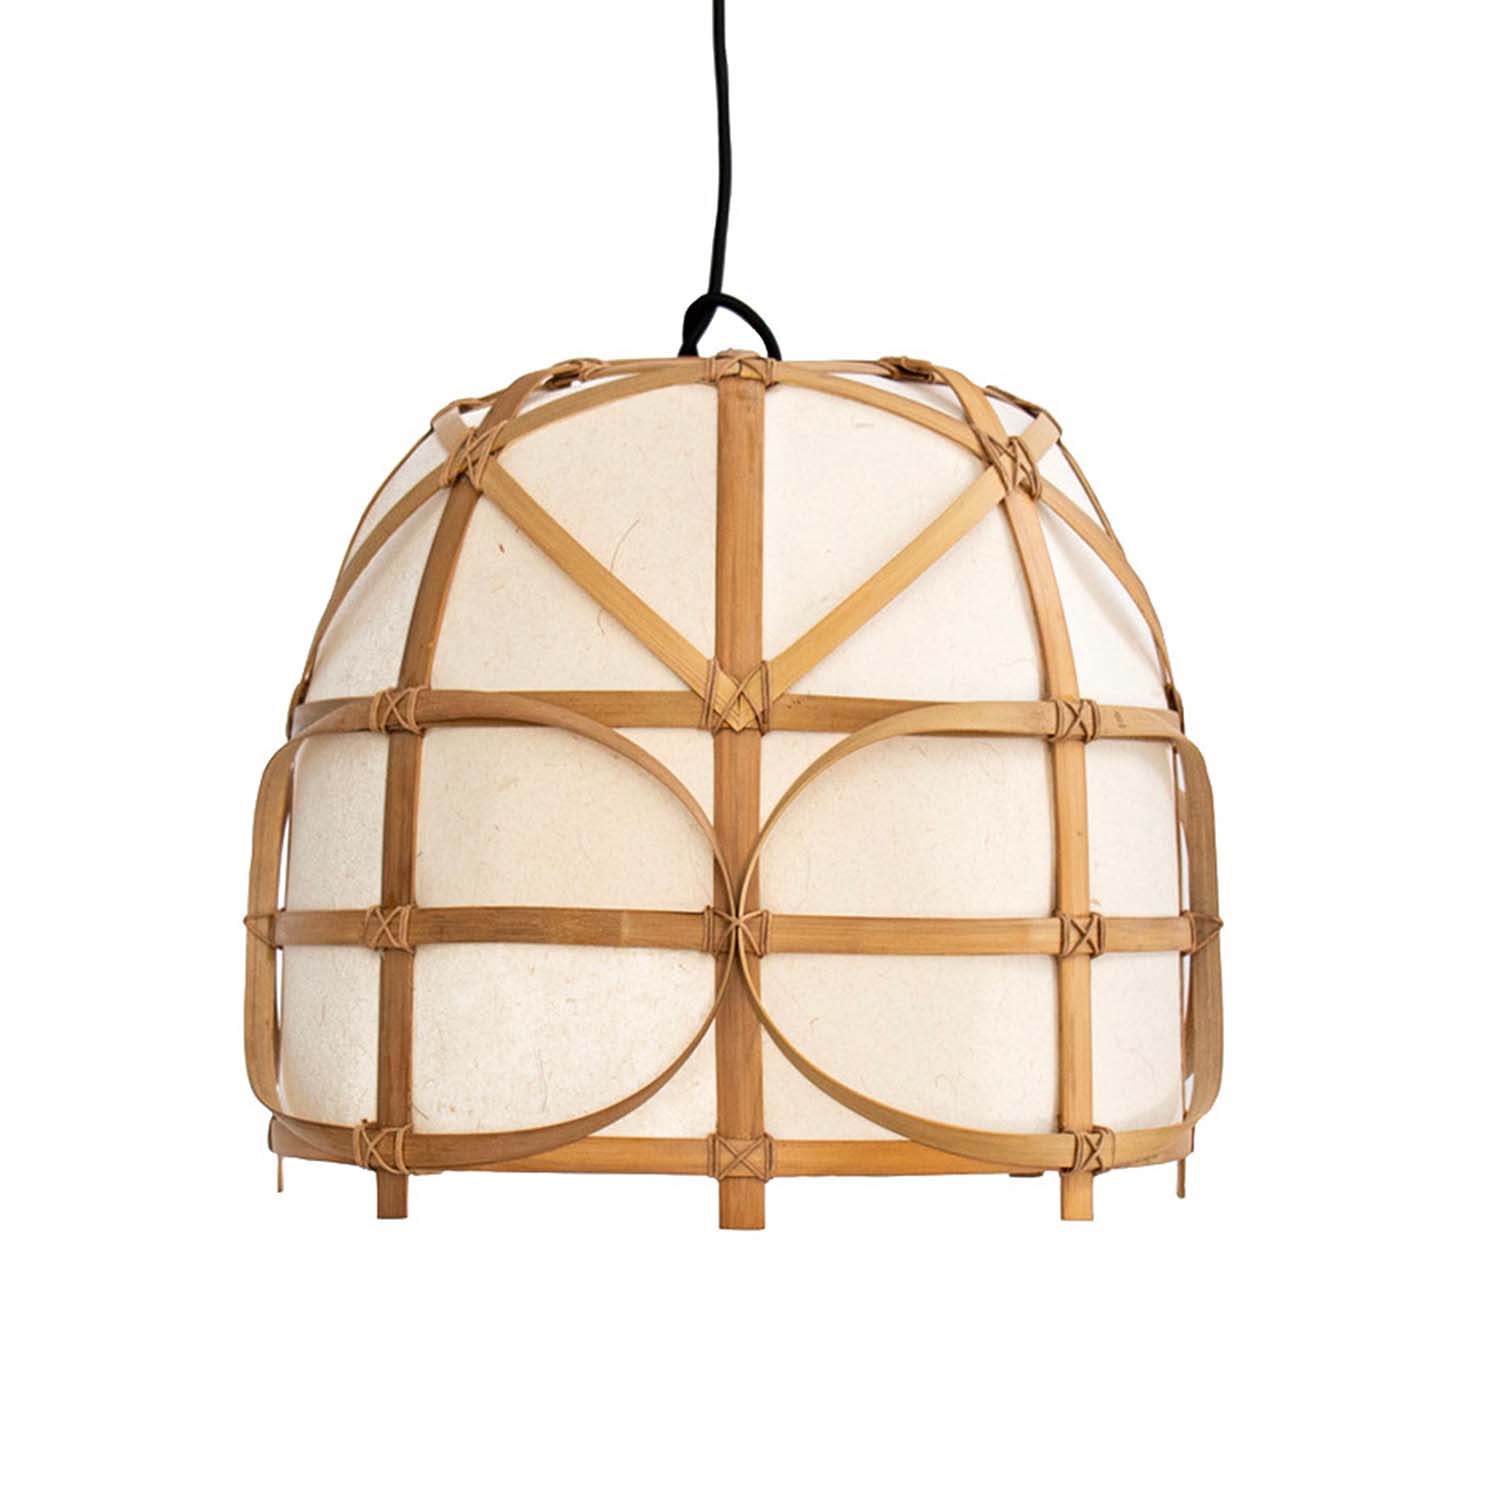 BAGOBO R - Cage pendant lamp in bamboo and ethnic white paper